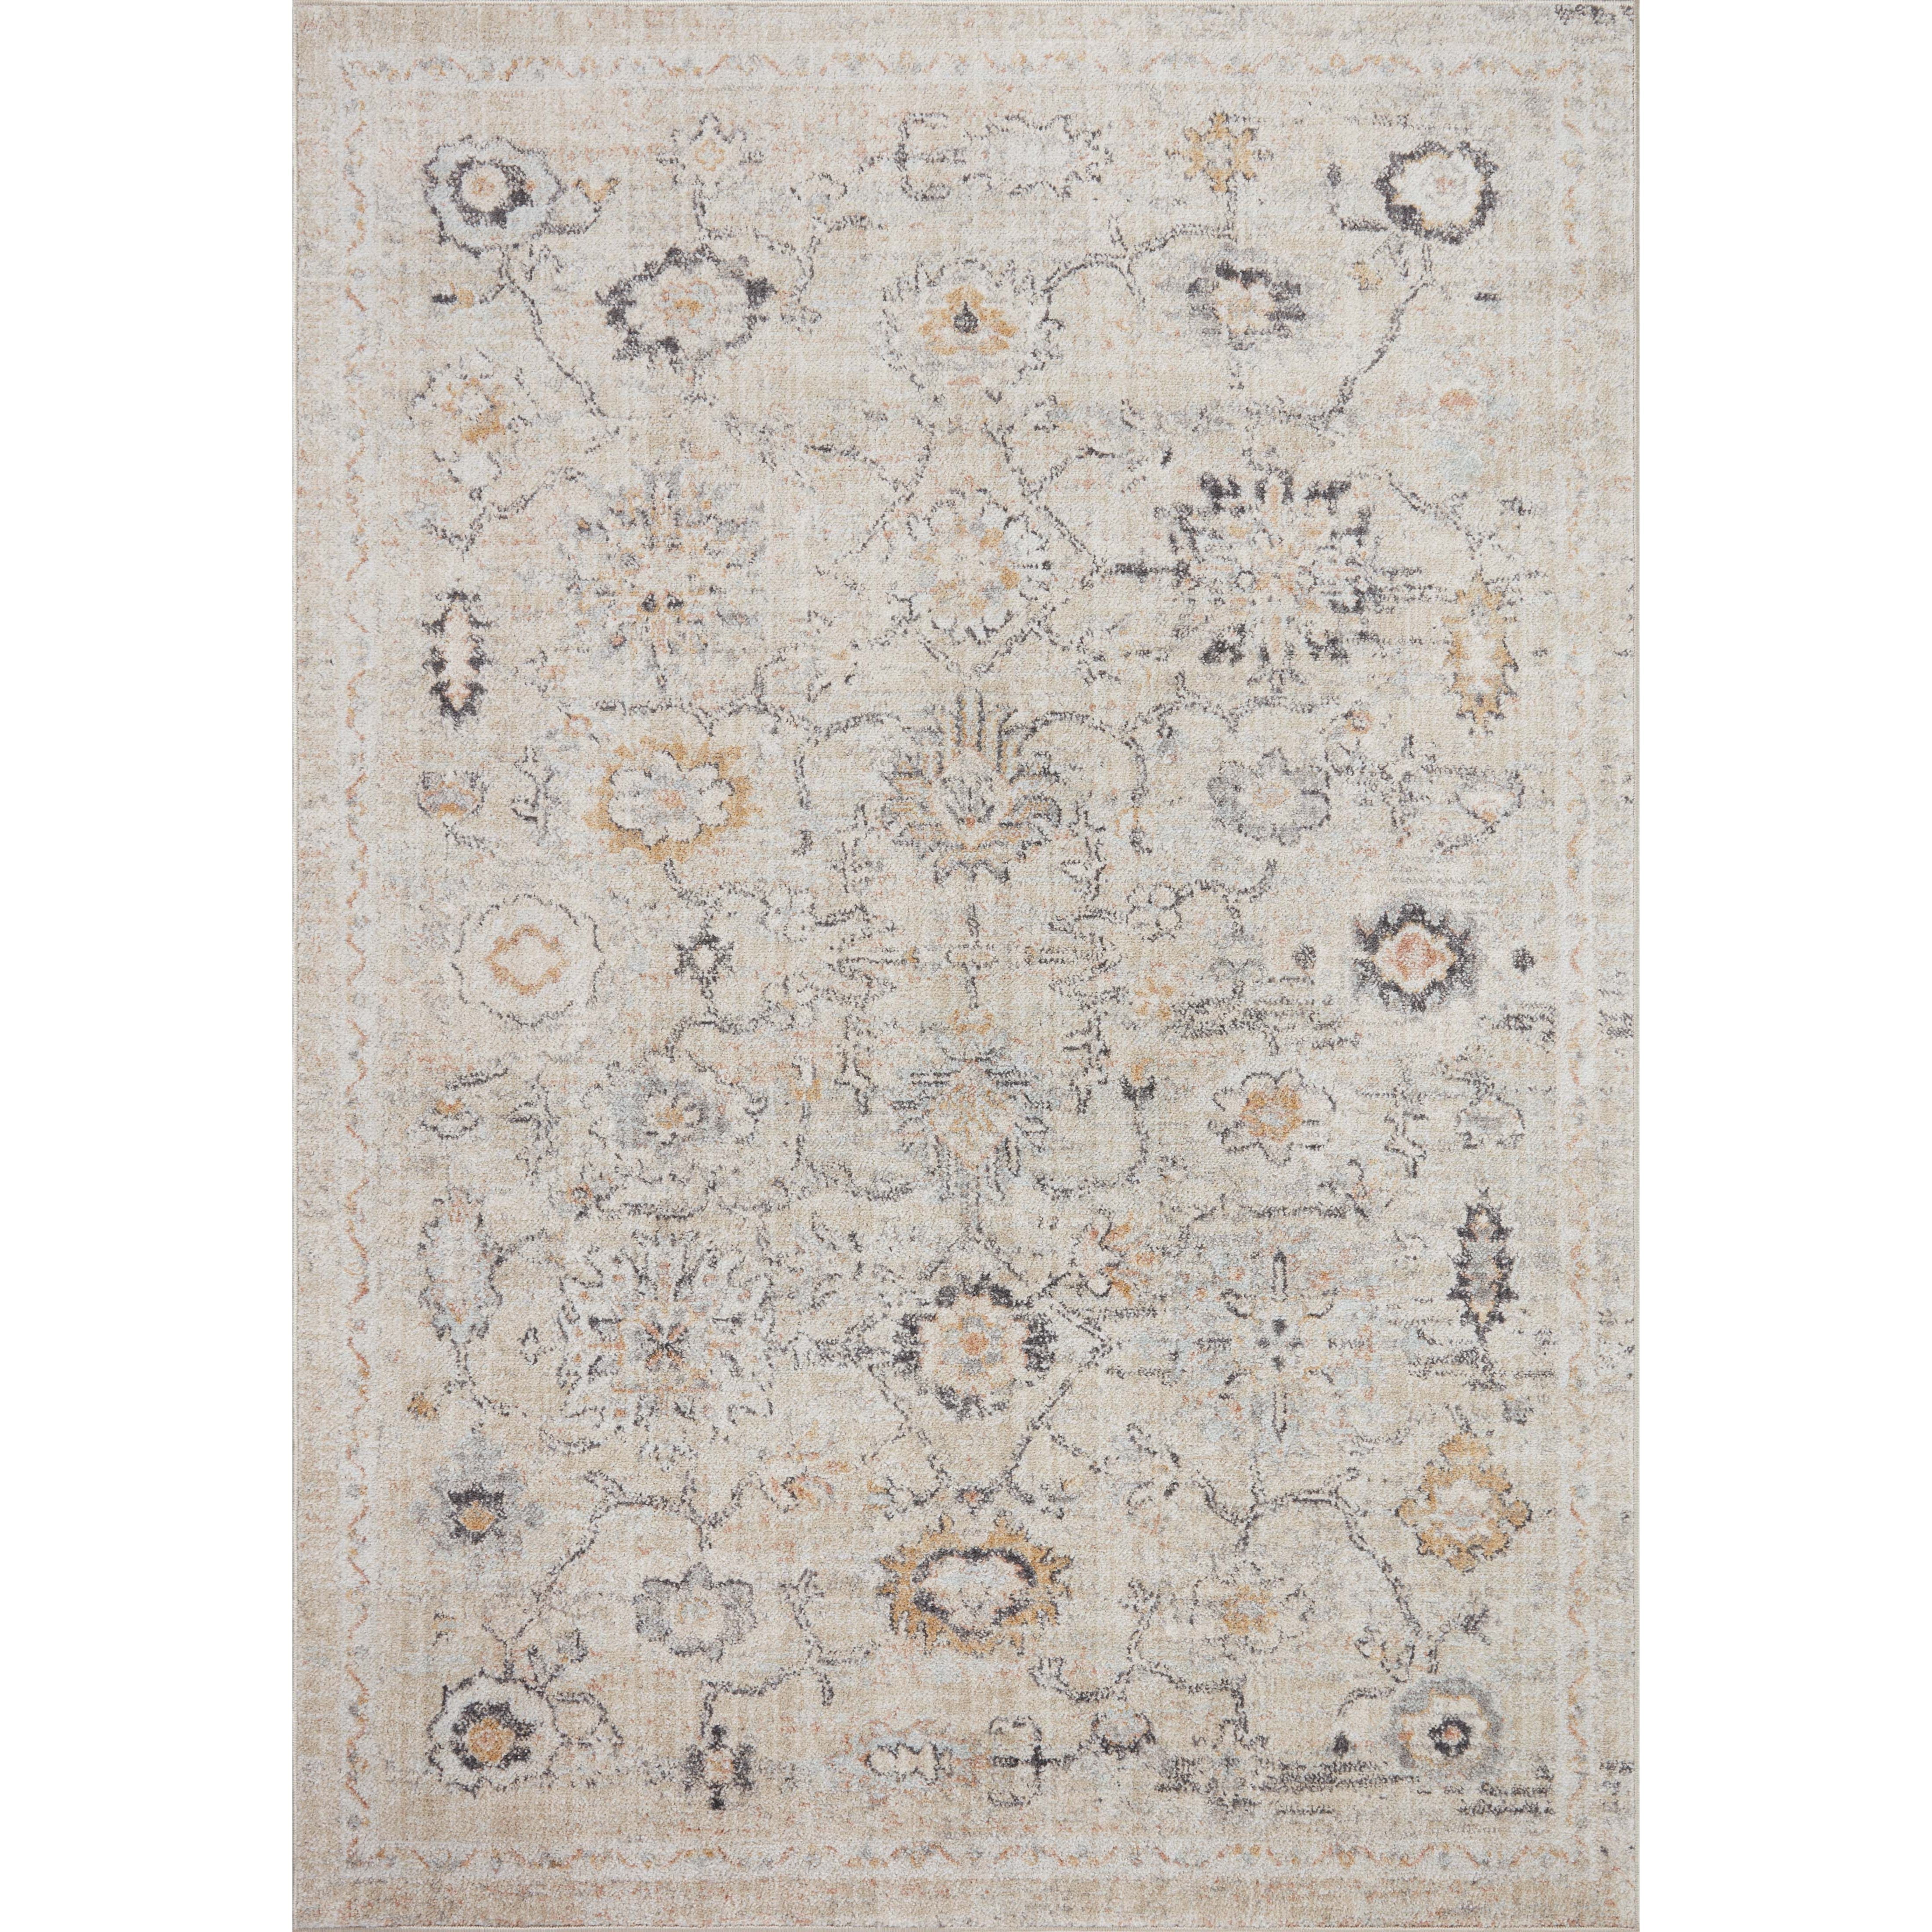 Inspired by antique Turkish Oushak carpets with large-scale motifs, the Monroe Natural / Multi Rug modernizes the traditional design in neutral palettes, many of which have black details that anchor the rug in the room. Monroe is power-loomed of 100% polypropylene for easy care and reliable durability. Amethyst Home provides interior design, new home construction design consulting, vintage area rugs, and lighting in the Alpharetta metro area.